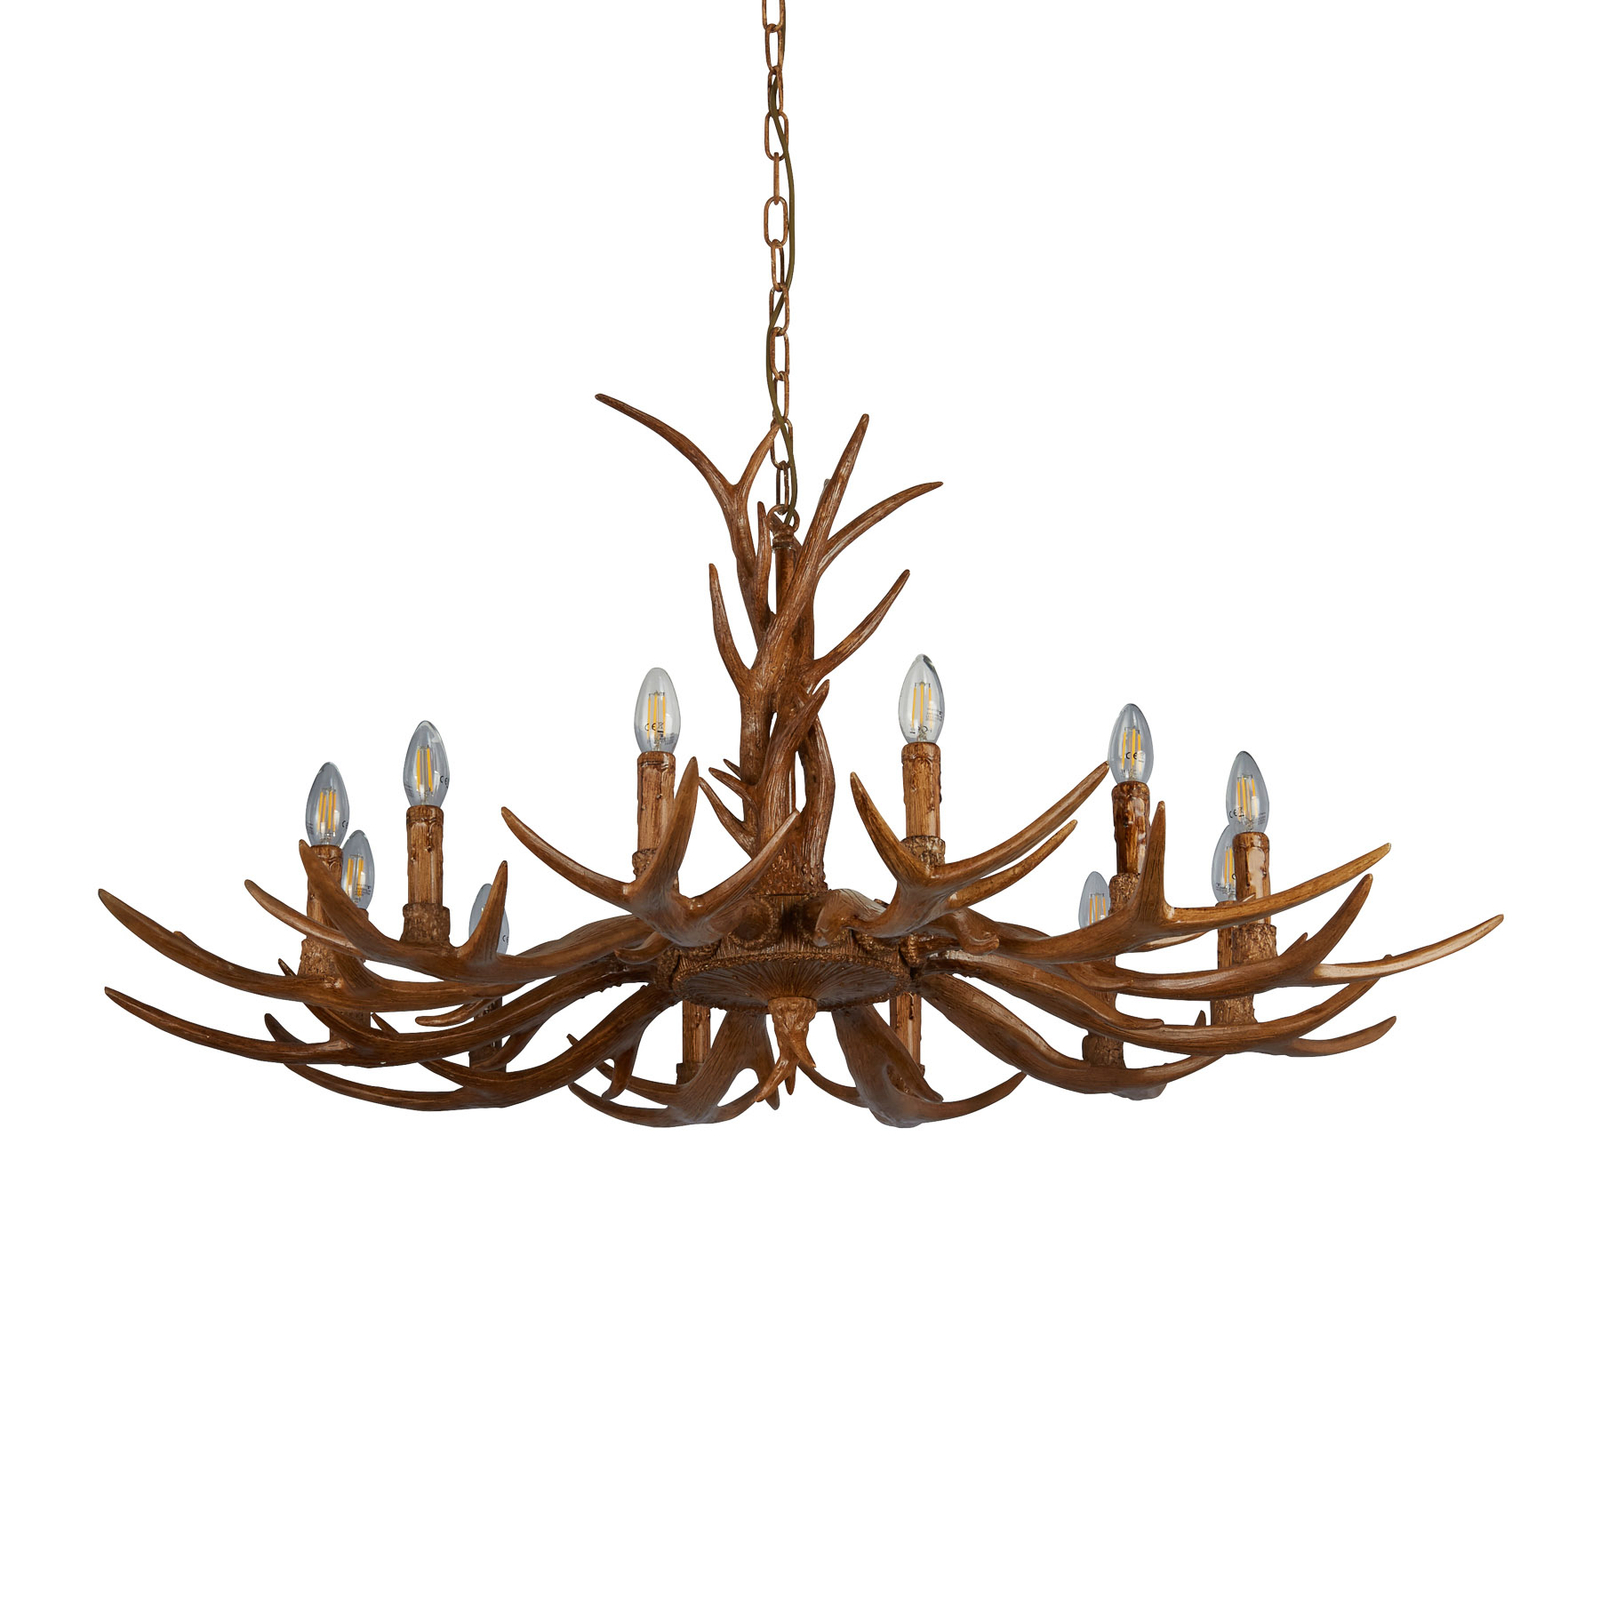 Stag chandelier in the form of antlers, 12-bulb